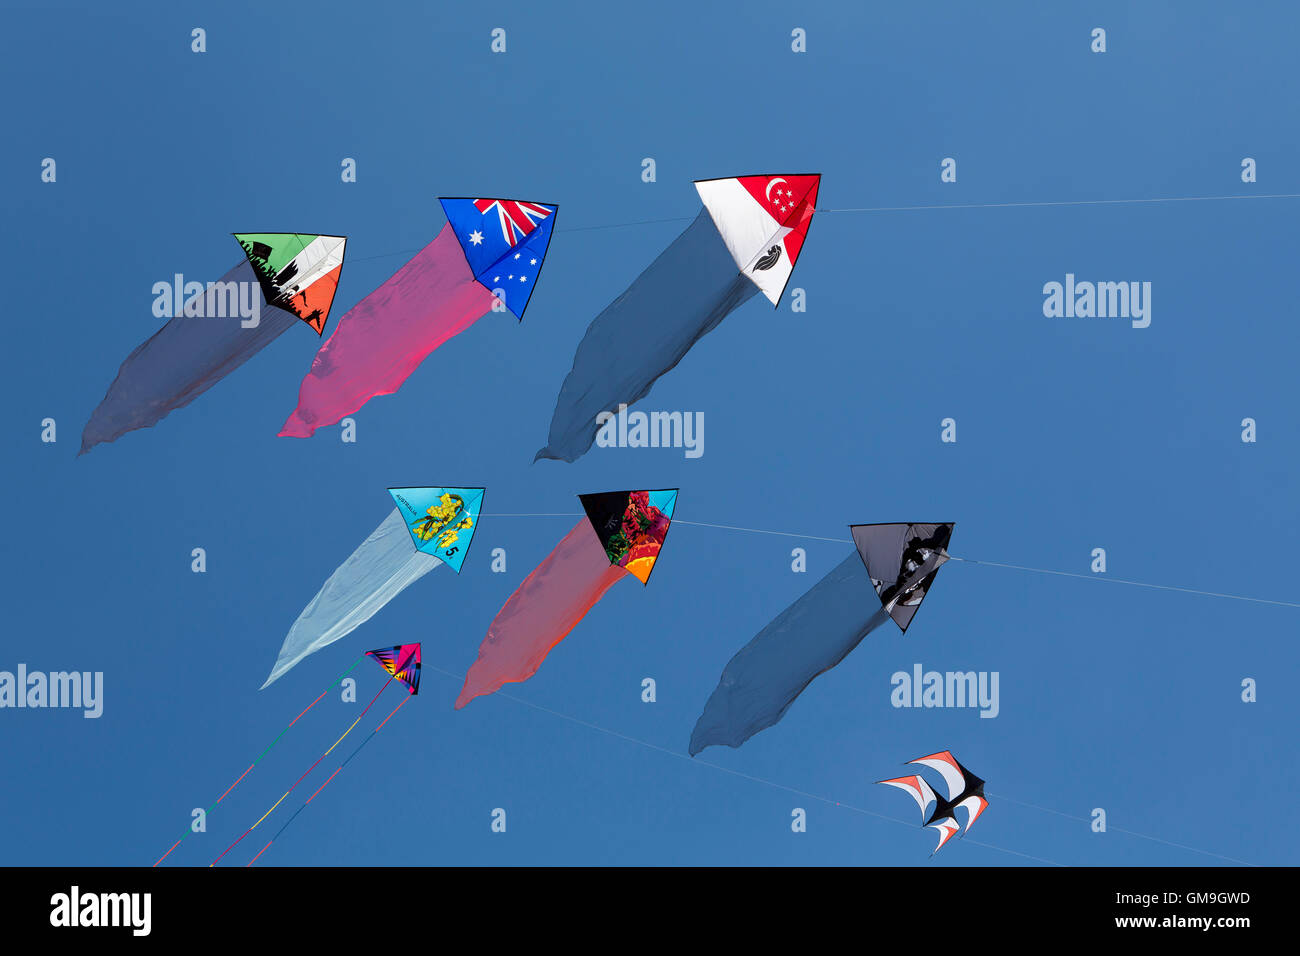 Group of six colourful kites flying in a clear blue sky. Flags and symbols on decorated silk high in the sky. Stock Photo